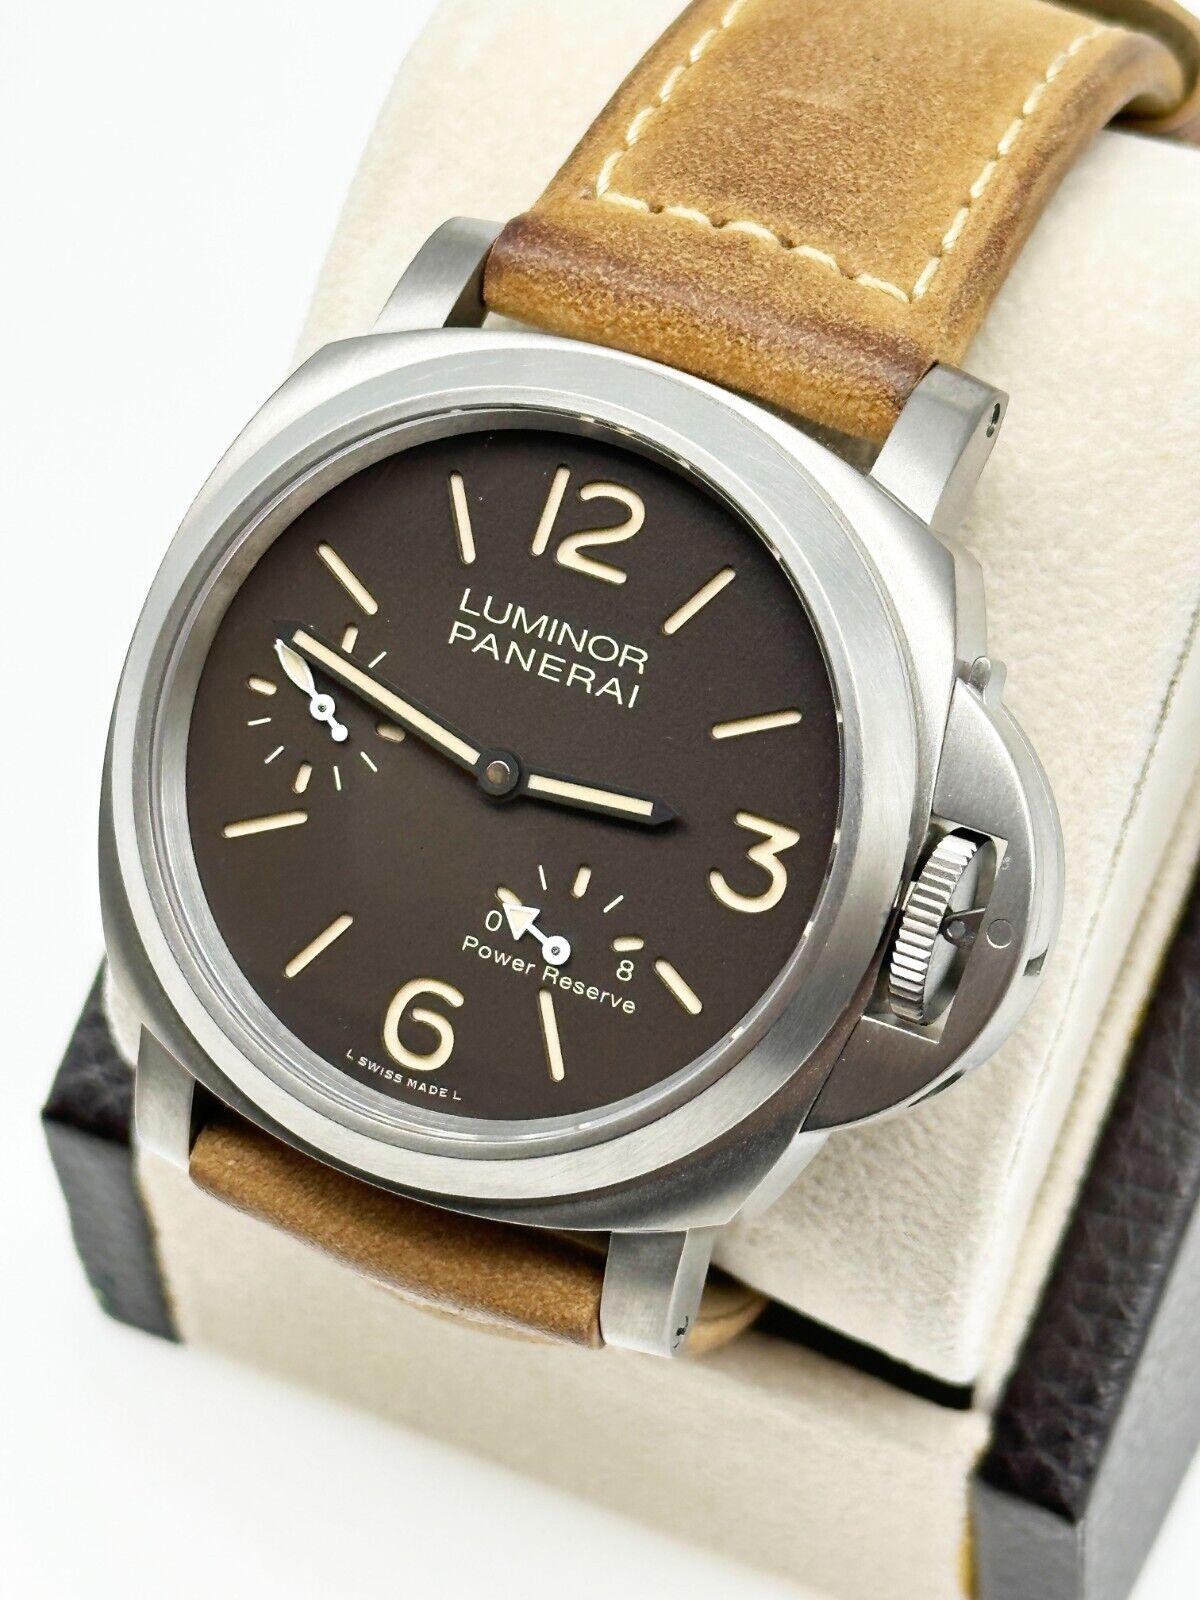 Style Number: PAM00797 / PAM797

Year: 2018

Model: Luminor 8 Day Power Reserve

Case Material: Titanium 

Band: Brown Leather 

Bezel:  Titanium 

Face: Sapphire Crystal 

Case Size: 44mm 
Includes: 

-Panerai Box & Booklet 

-Certified Appraisal